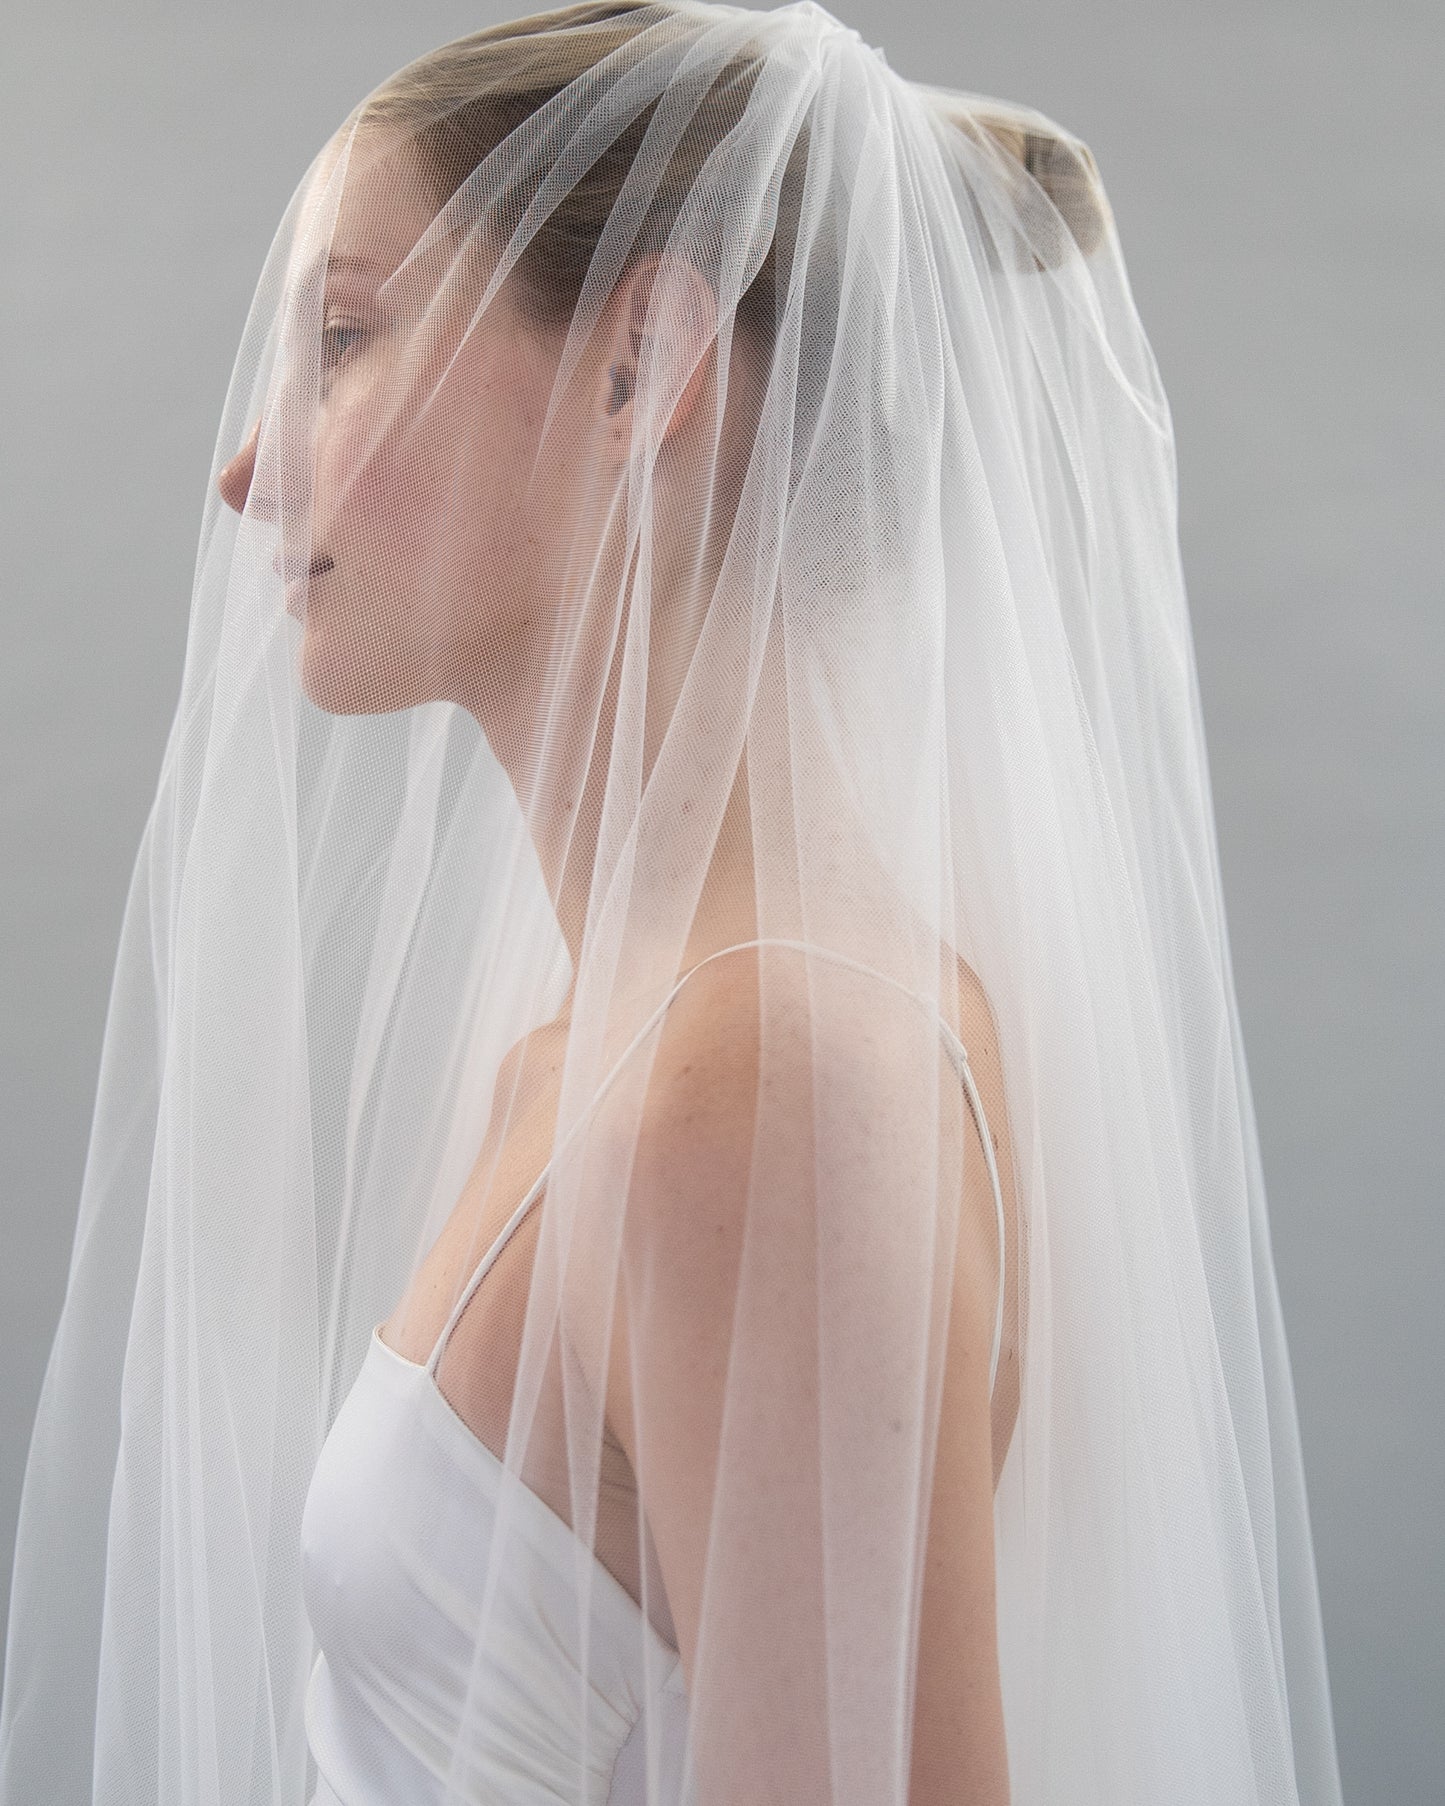 TWO TIER CLASSIC VEIL